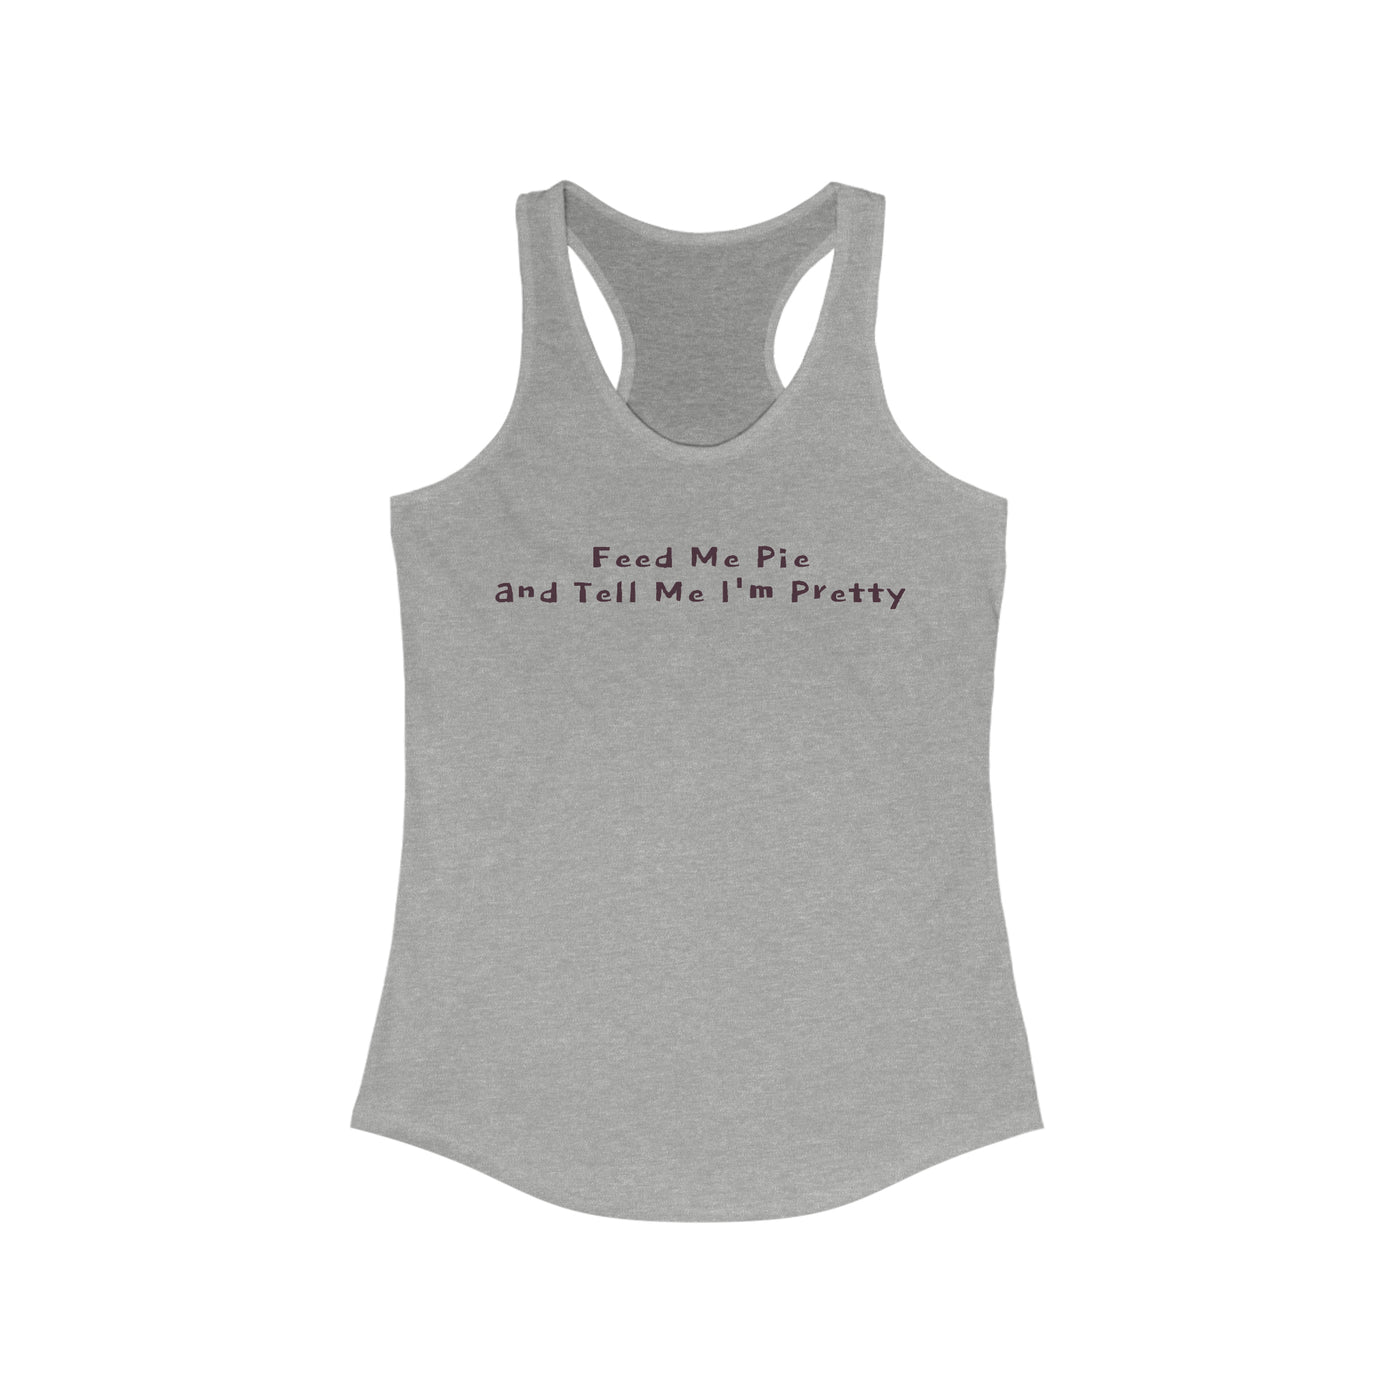 Feed Me Pie And Tell Me I'm Pretty Women's Racerback Tank